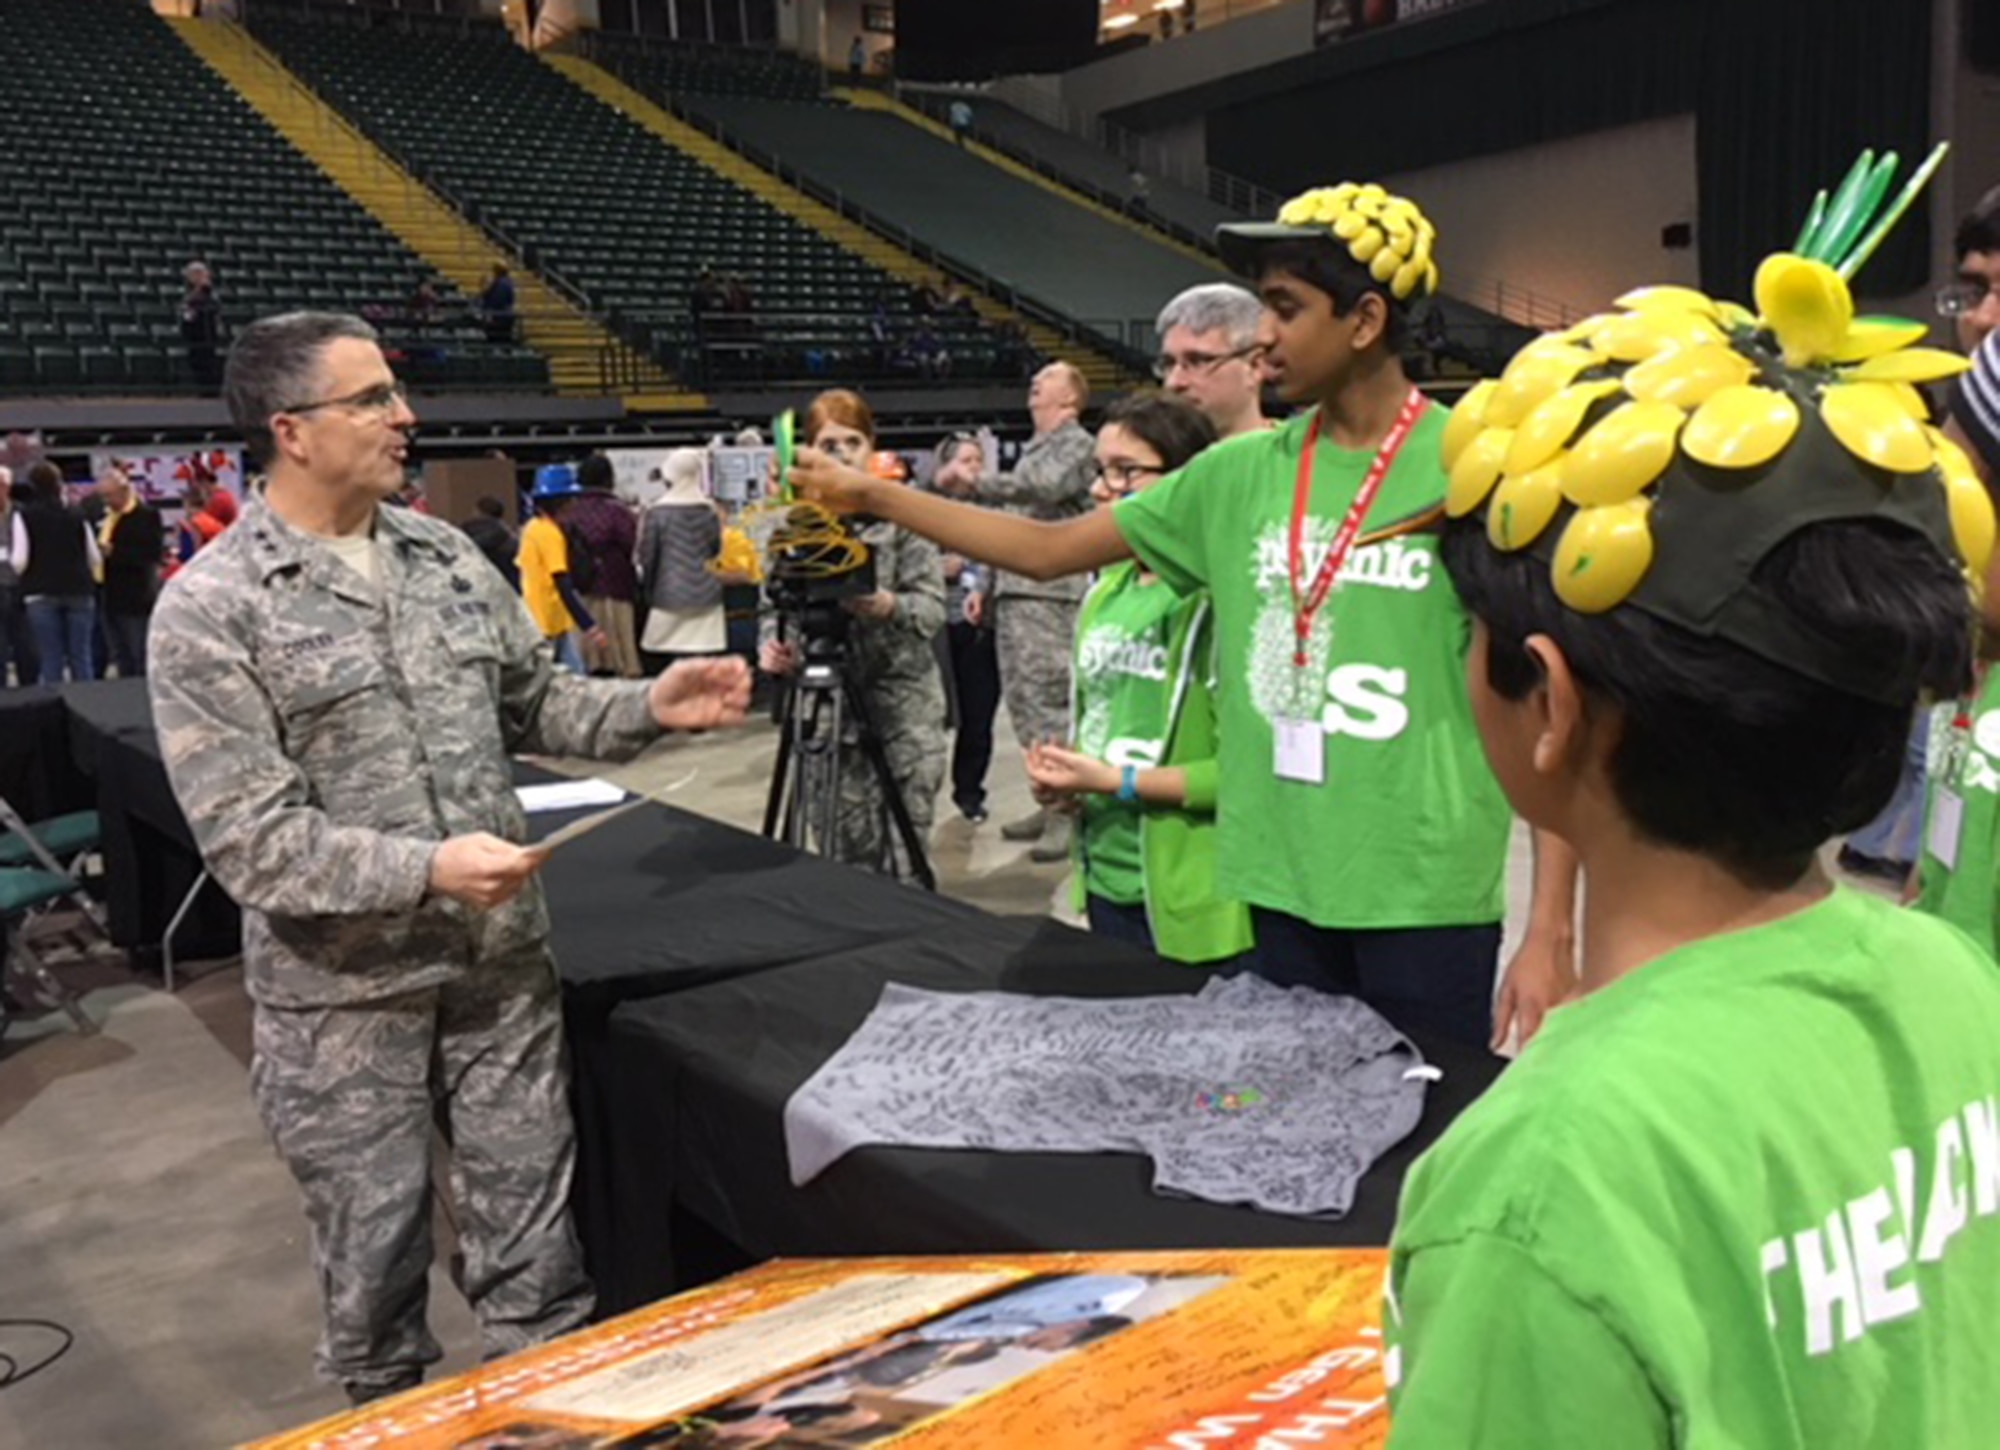 Maj. Gen.William Cooley, Air Force Research Laboratory commander, Wright-Patterson Air Force Base, explains how important it is for students to pursue STEM-related careers during the FIRST LEGO League Ohio Championship Tournament held Feb. 4, 2018, at Wright State University. (U.S.Air Force photo/Marie Vanover)